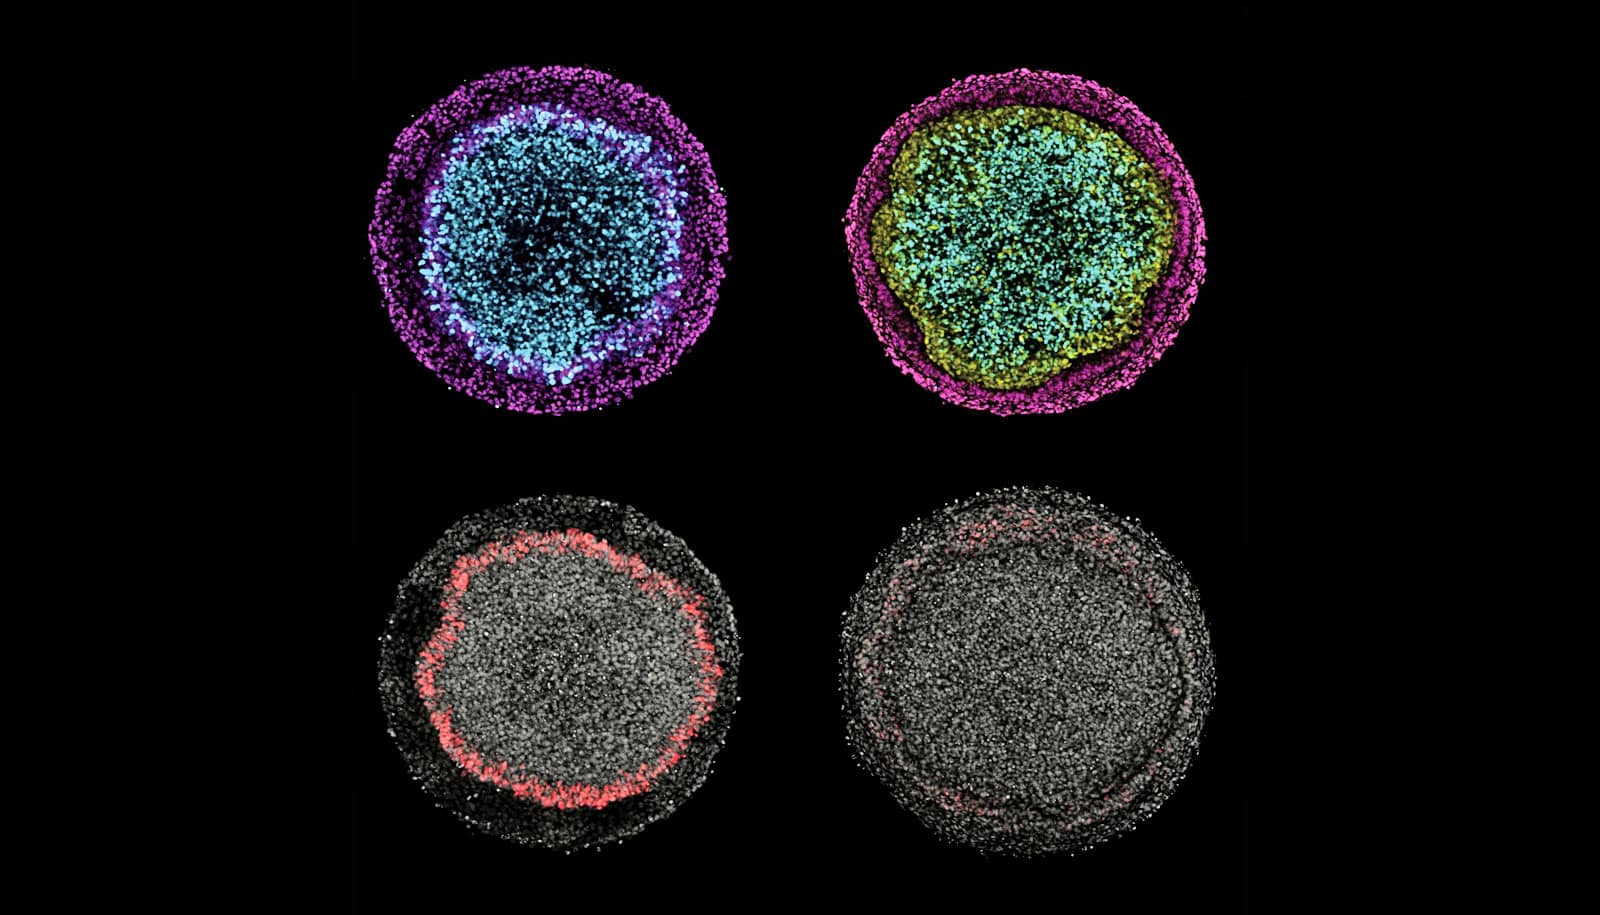 Patterned dish reveals new info about early embryo